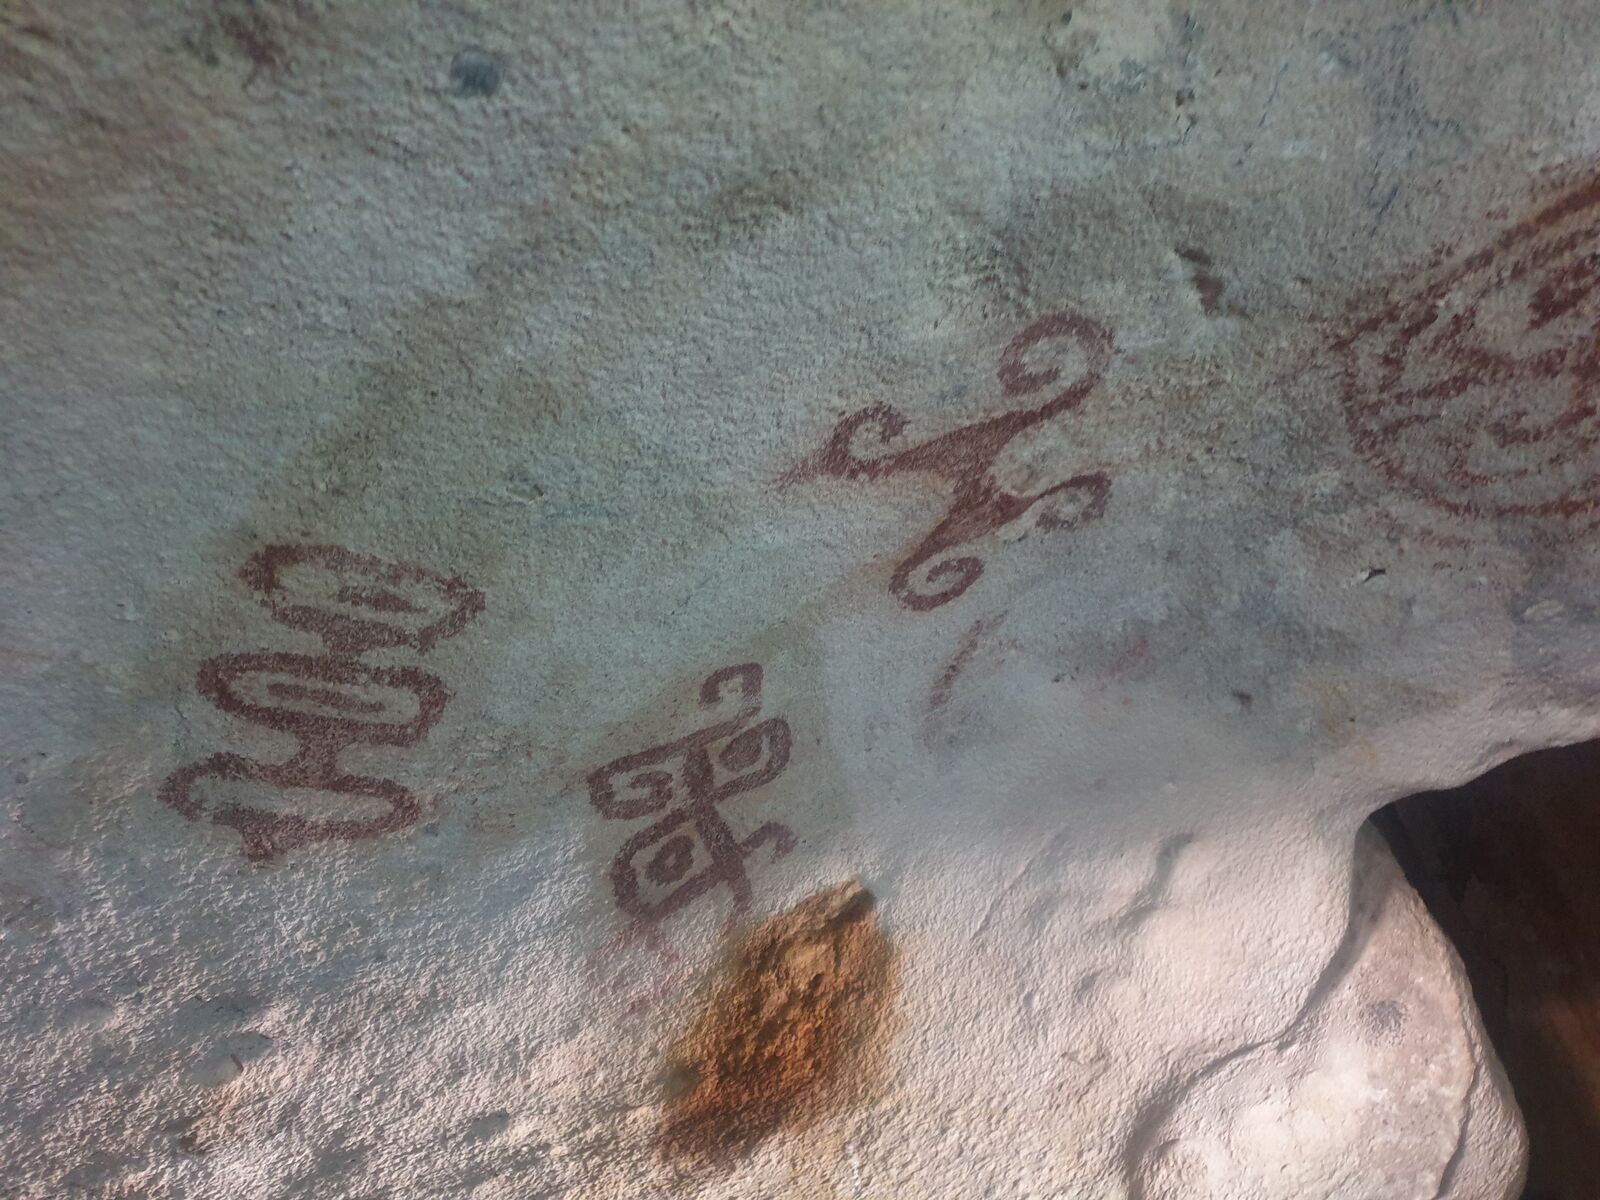 Cave drawings were left there many ages ago.